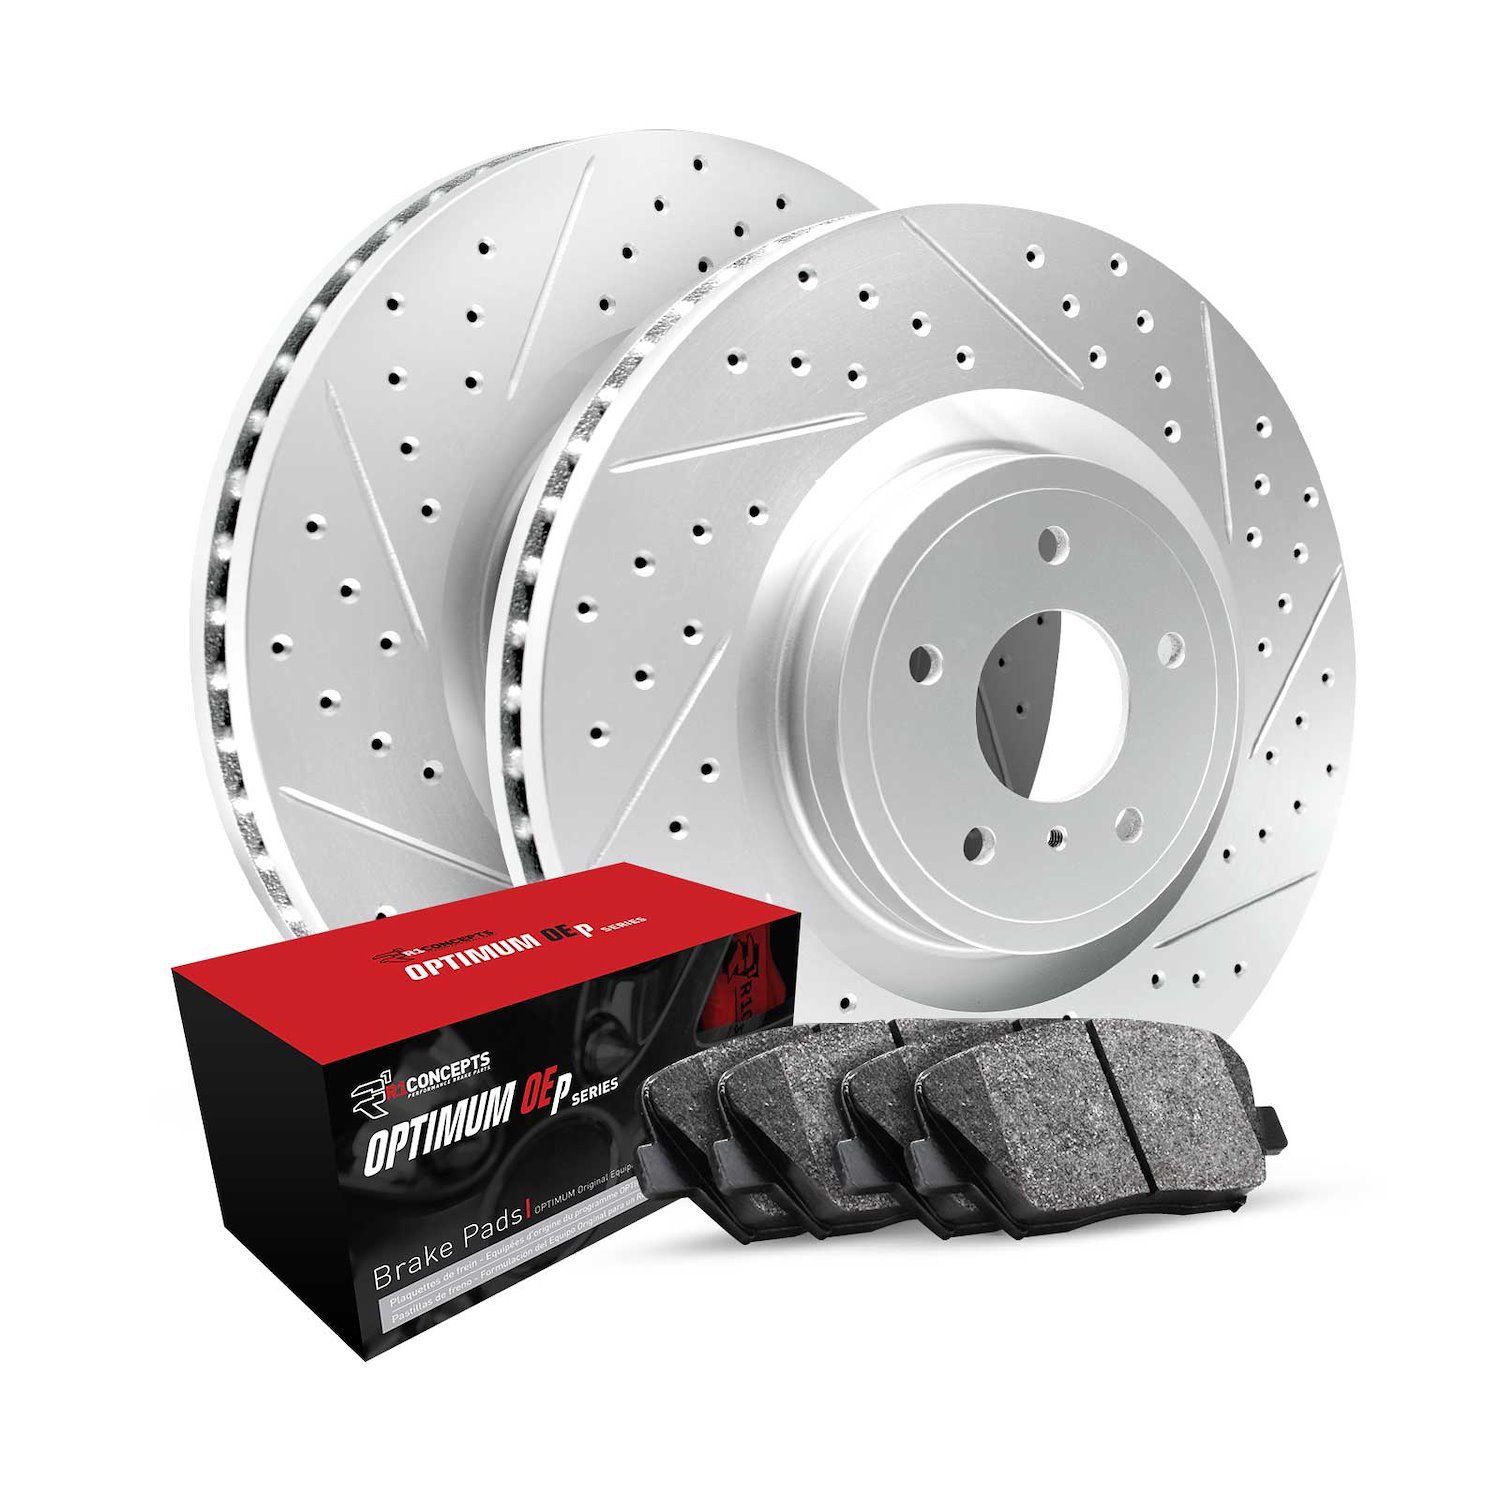 GEO-Carbon Drilled/Slotted Rotors w/Optimum OE Pads, 1961-1963 Mercedes-Benz, Position: Rear